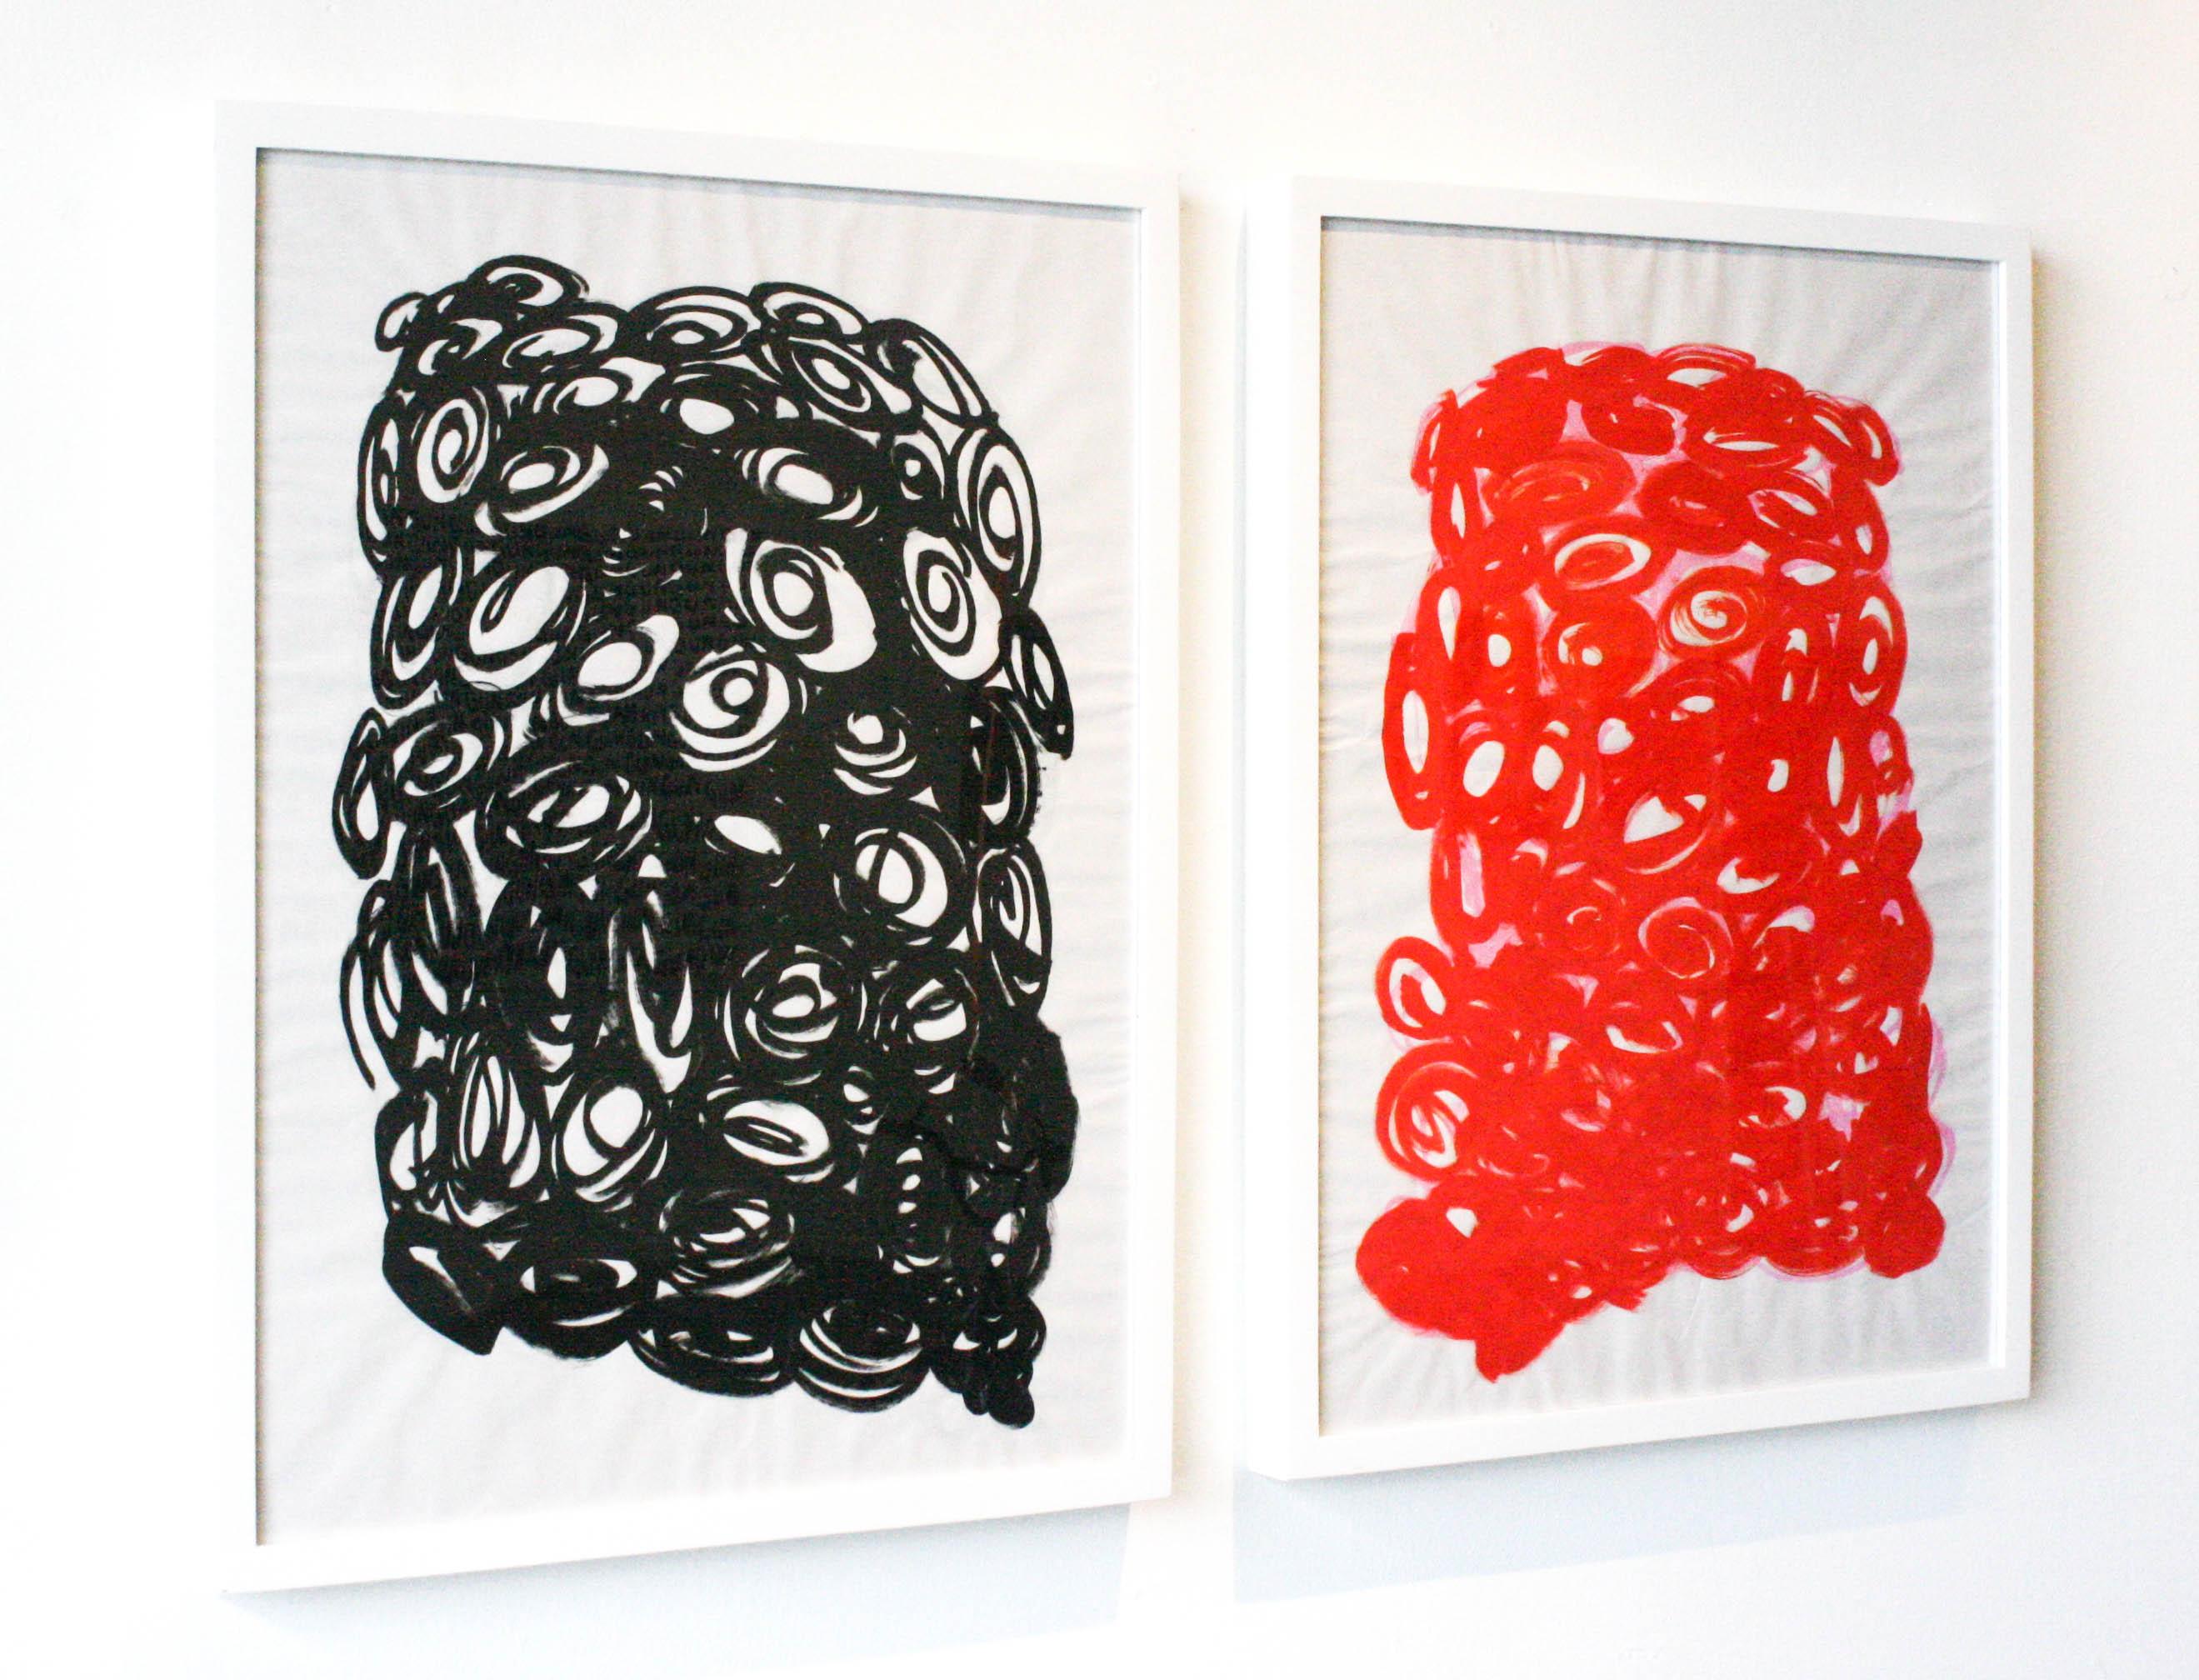 Untitled Diptych- Abstract, Acrylic Paint, Paper, Red, Black, Spirals, Circles - Contemporary Painting by Duncan McDaniel